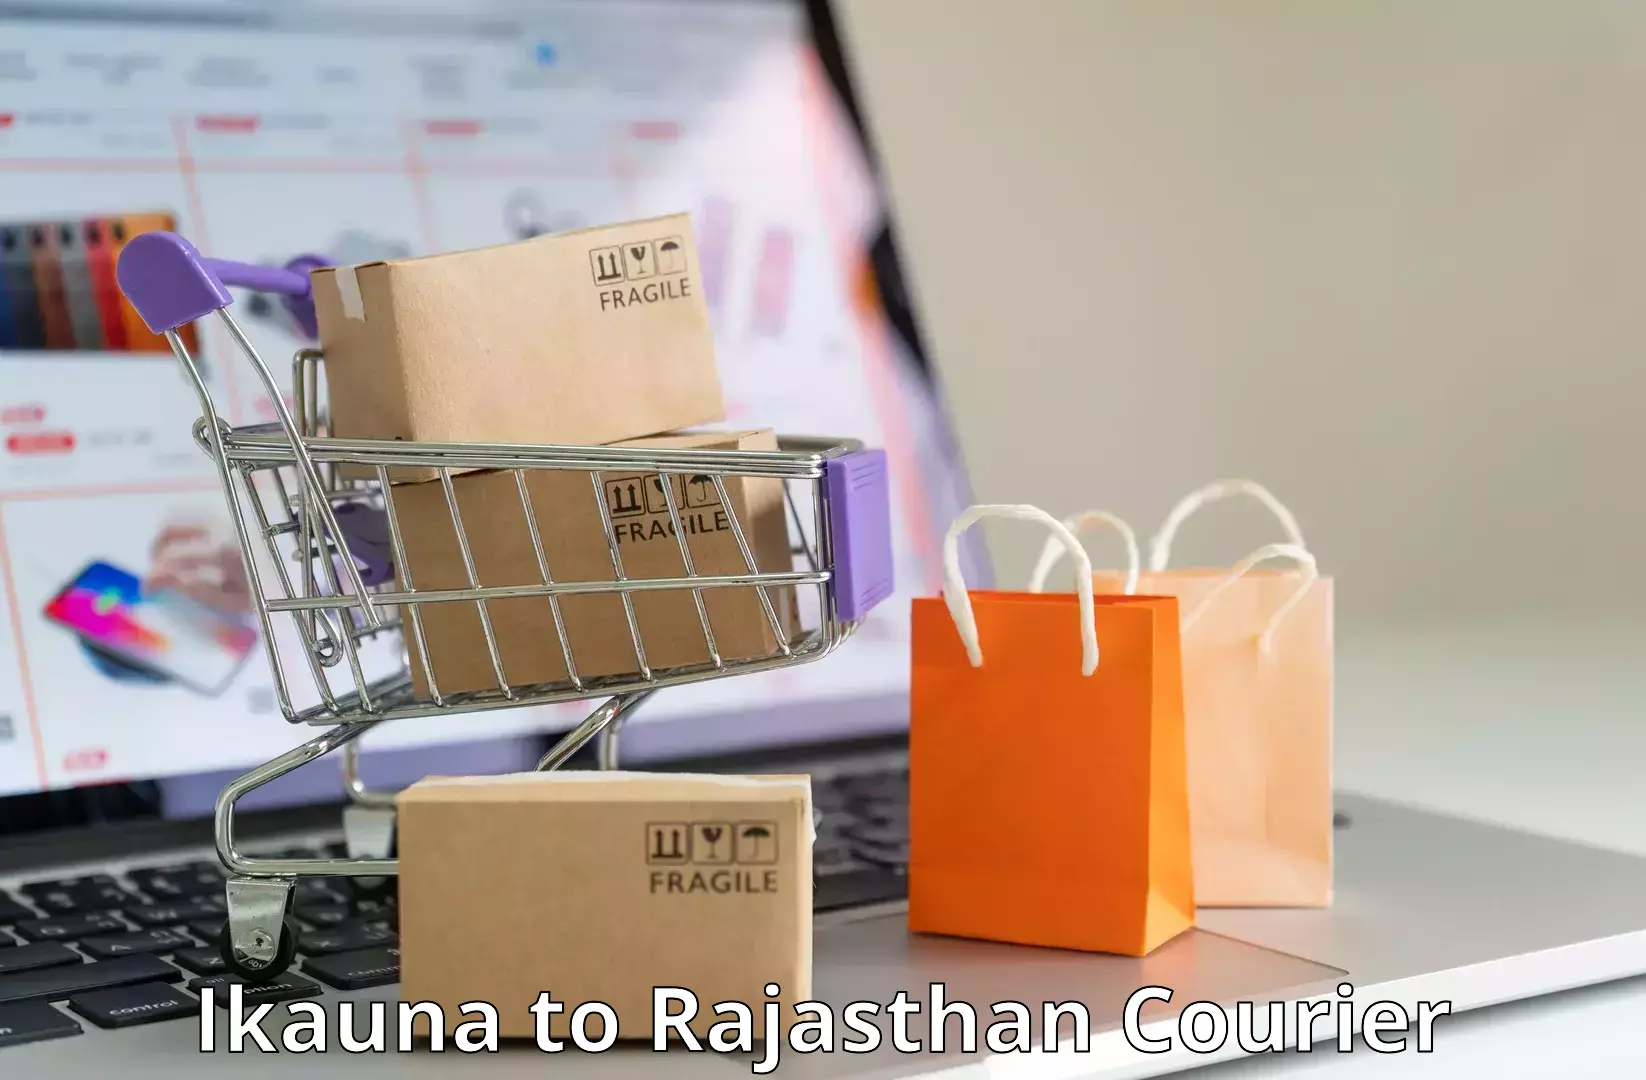 Easy access courier services in Ikauna to Rajasthan